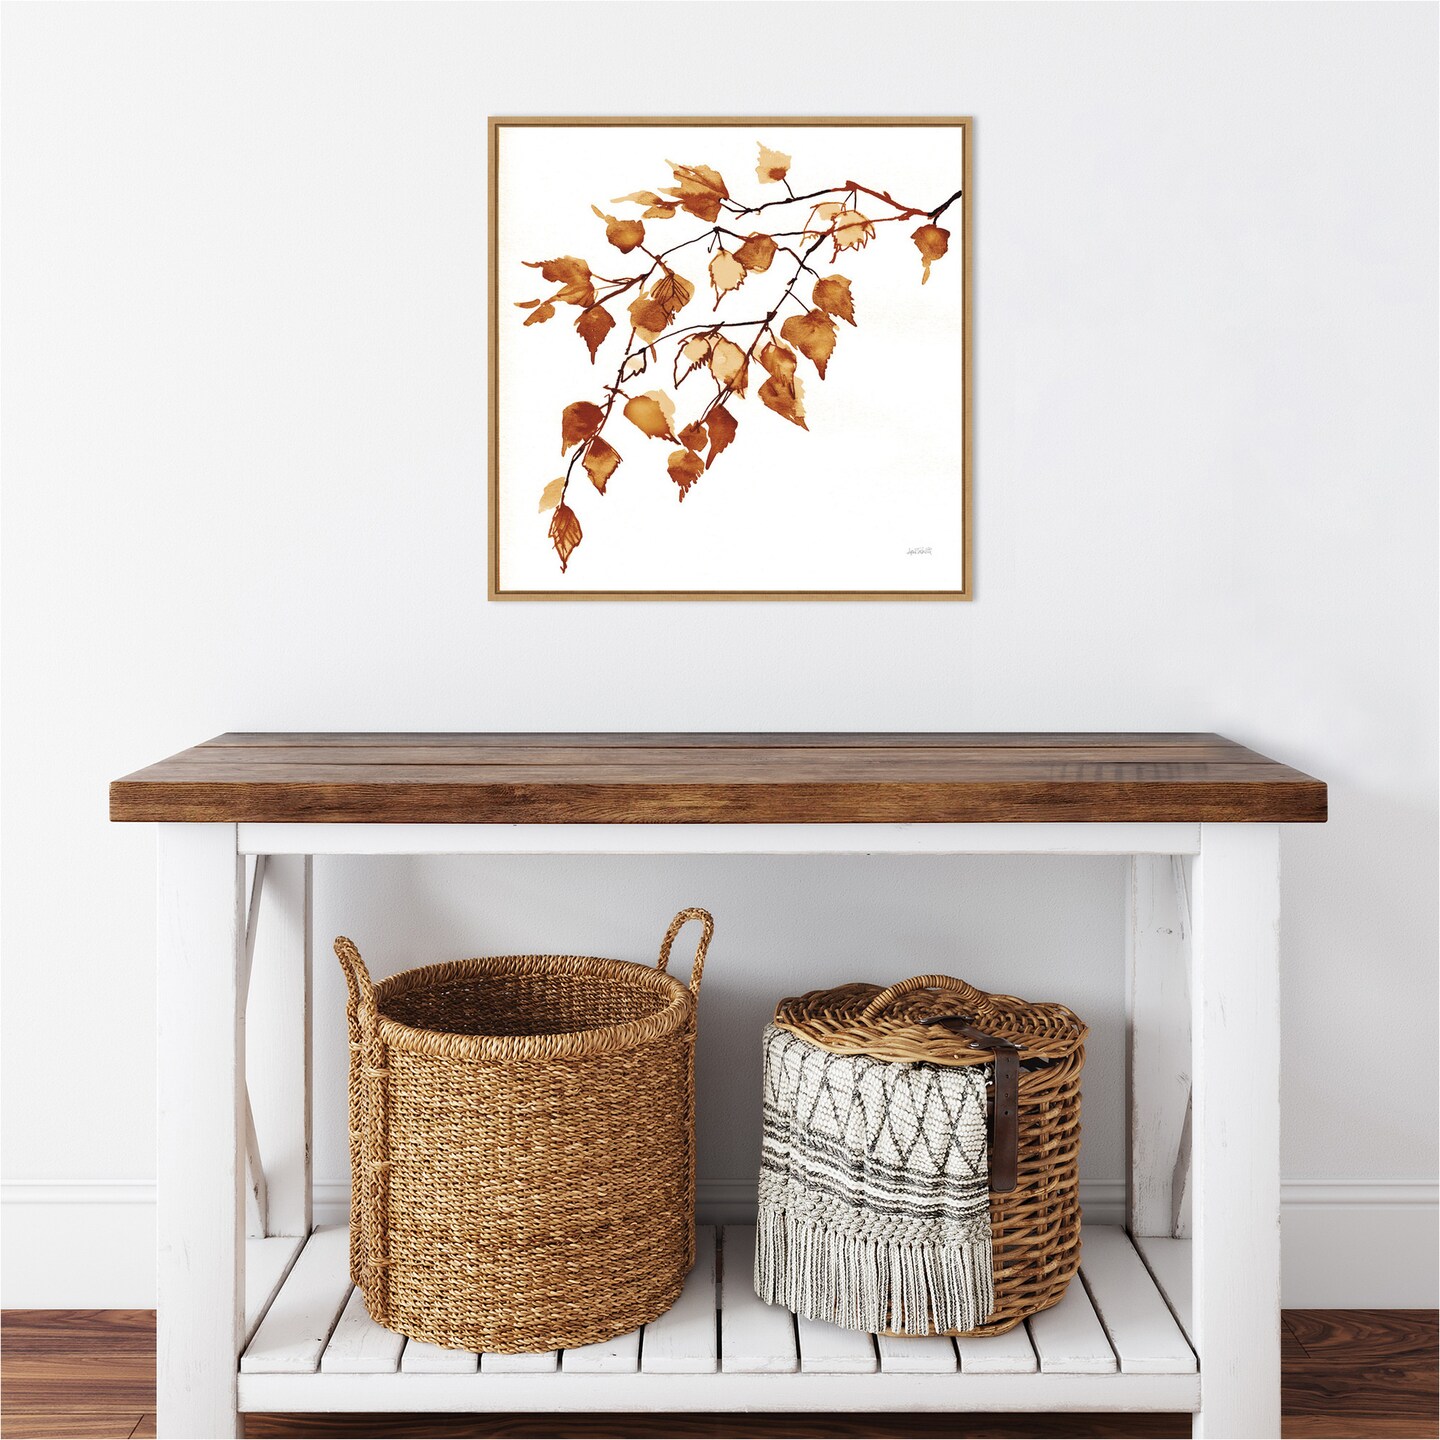 Colors of the Fall VIII by Anne Tavoletti 22-in. W x 22-in. H. Canvas Wall Art Print Framed in Natural